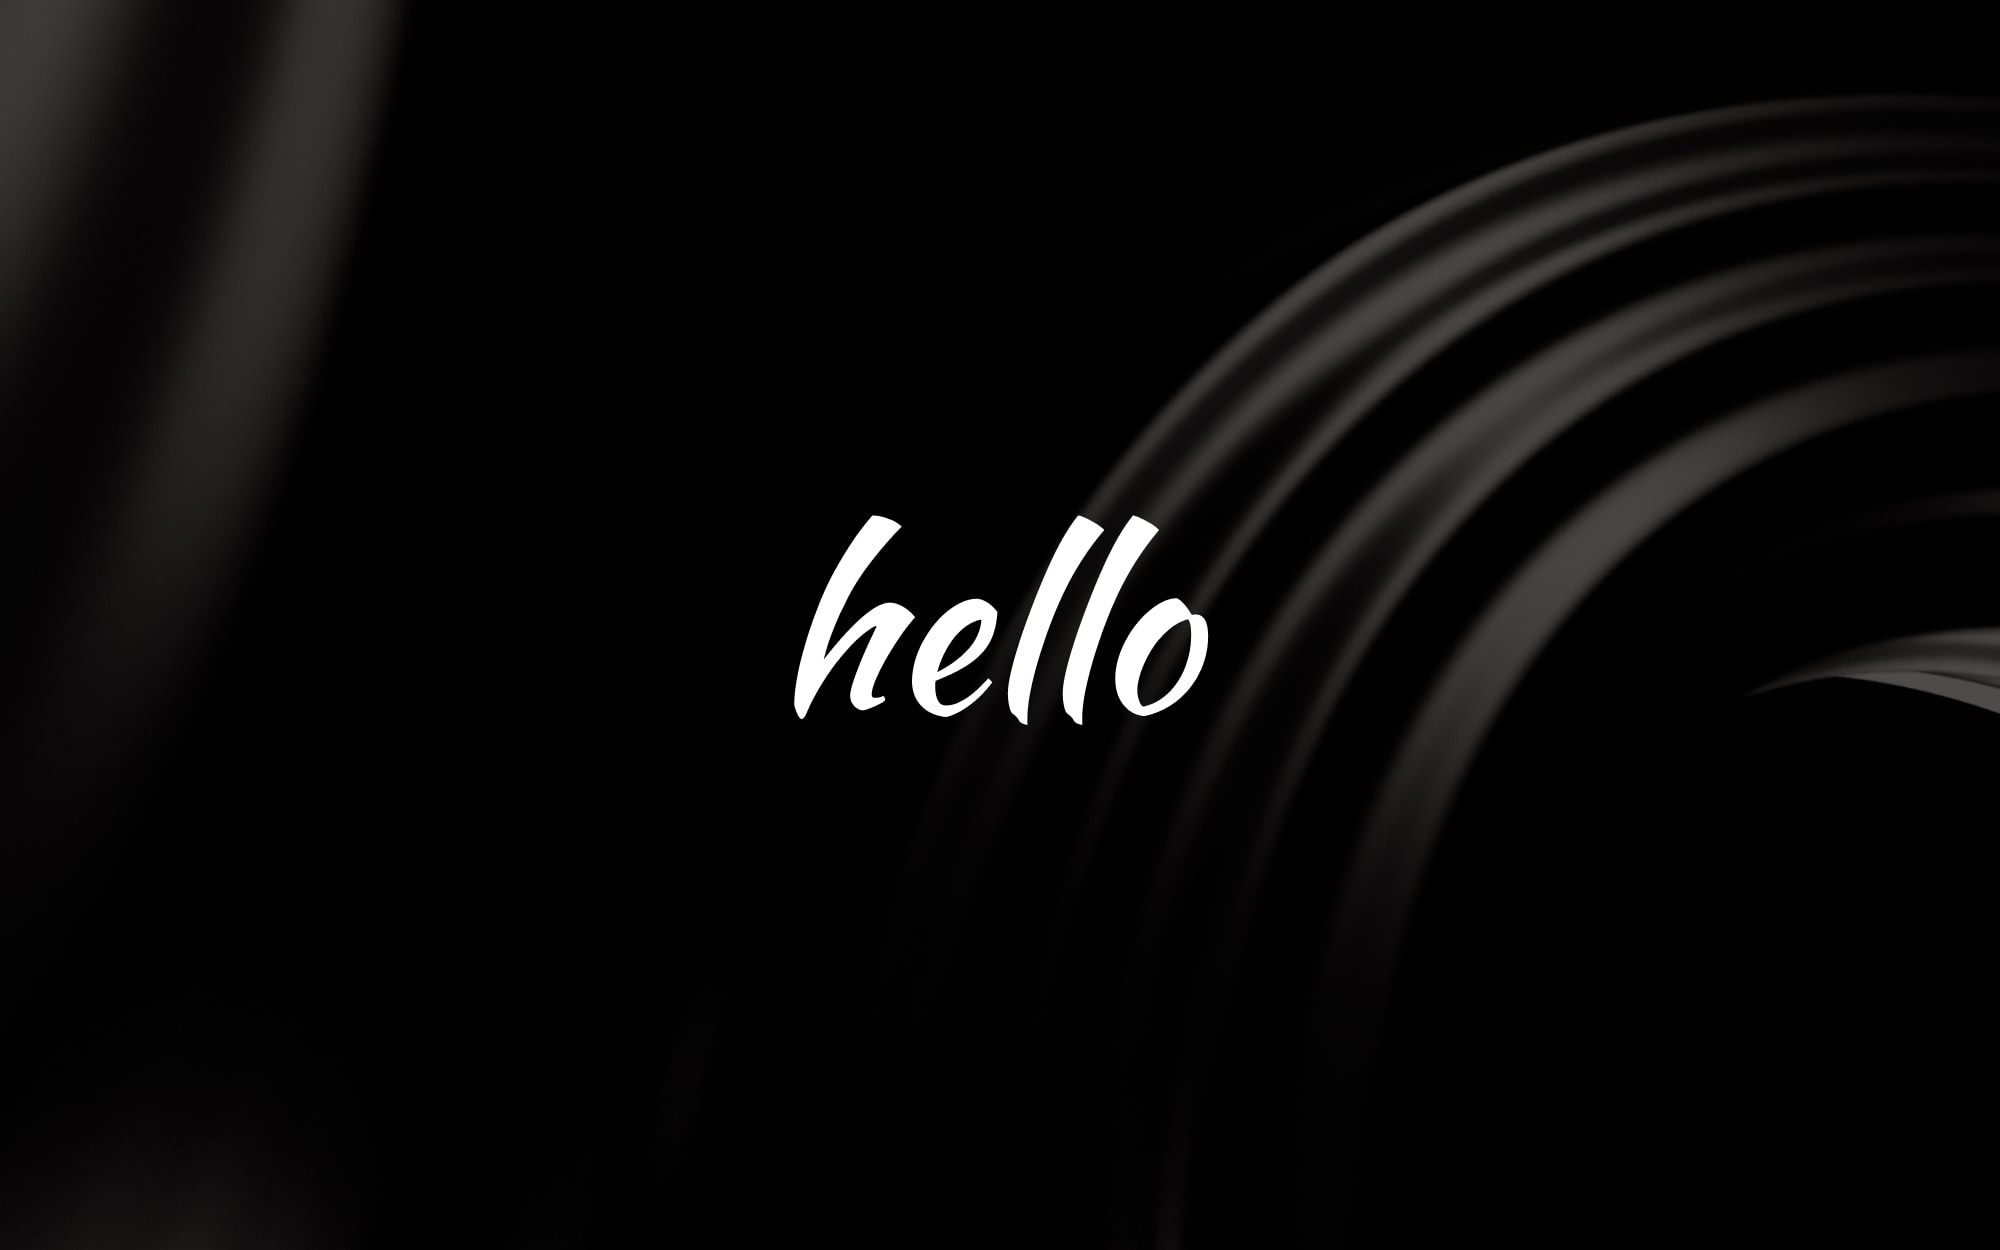 Black backdrop with gray swirls. In the center in white curive lettering is the word "hello"